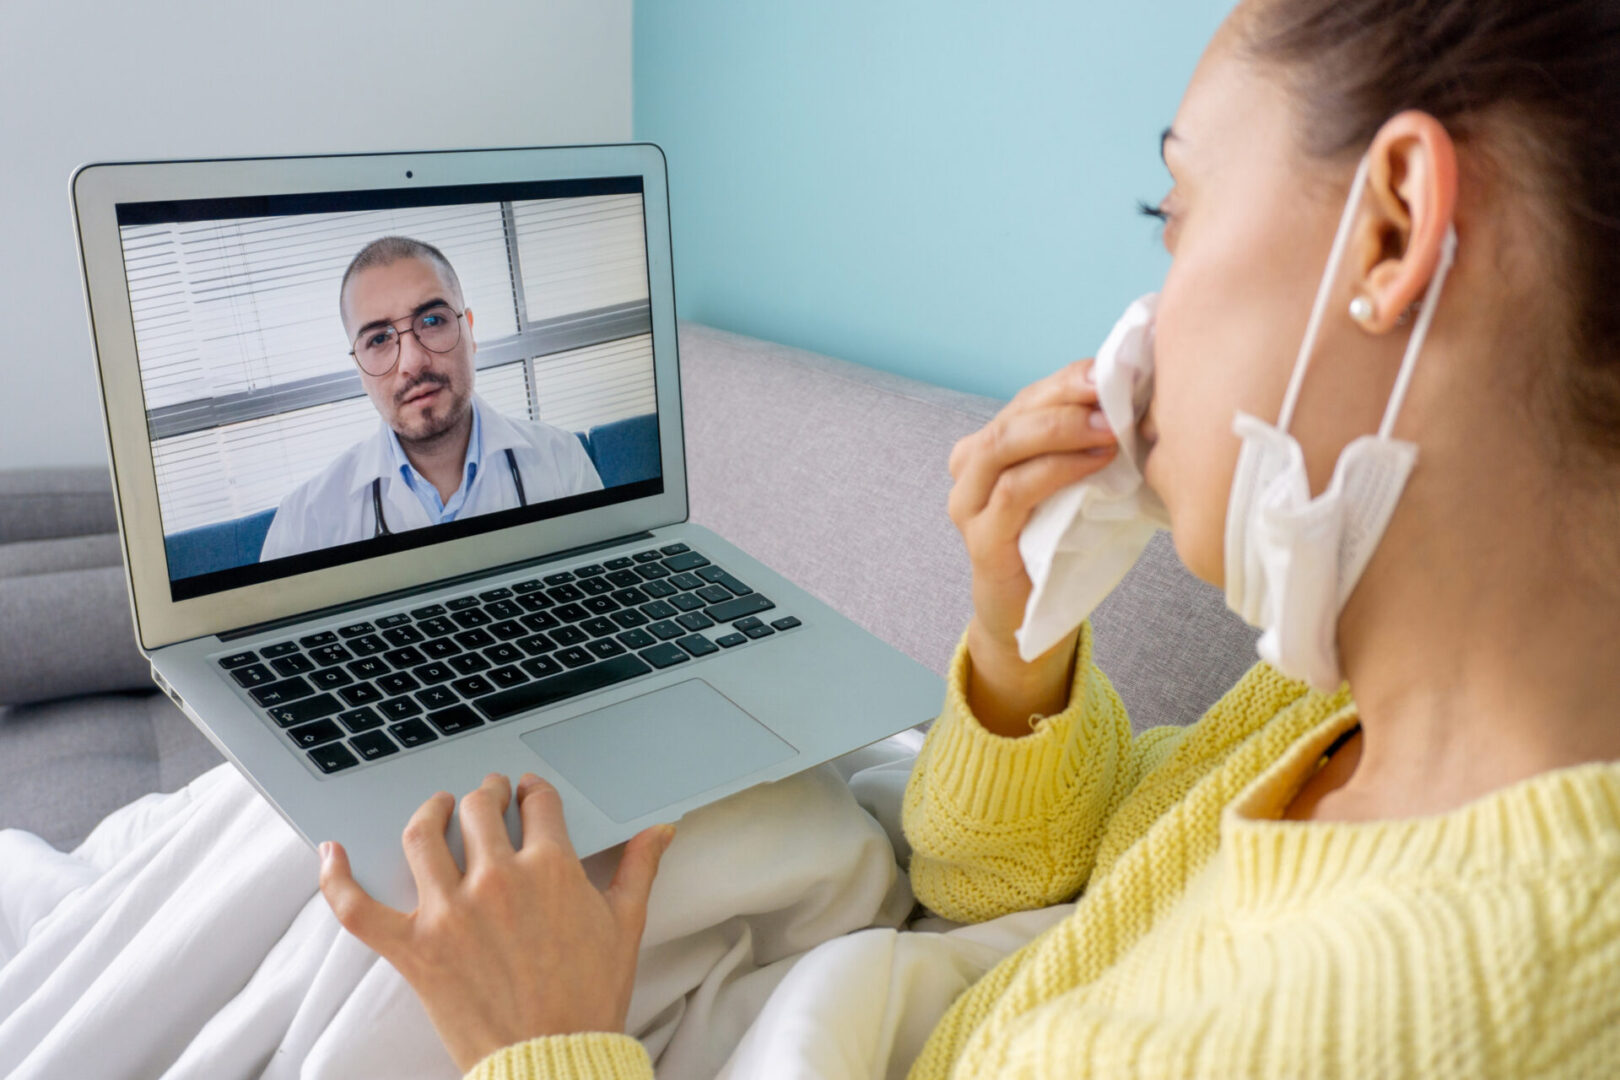 Sick woman at home talking to her doctor through a video conference on her laptop computer â telemedicine concepts